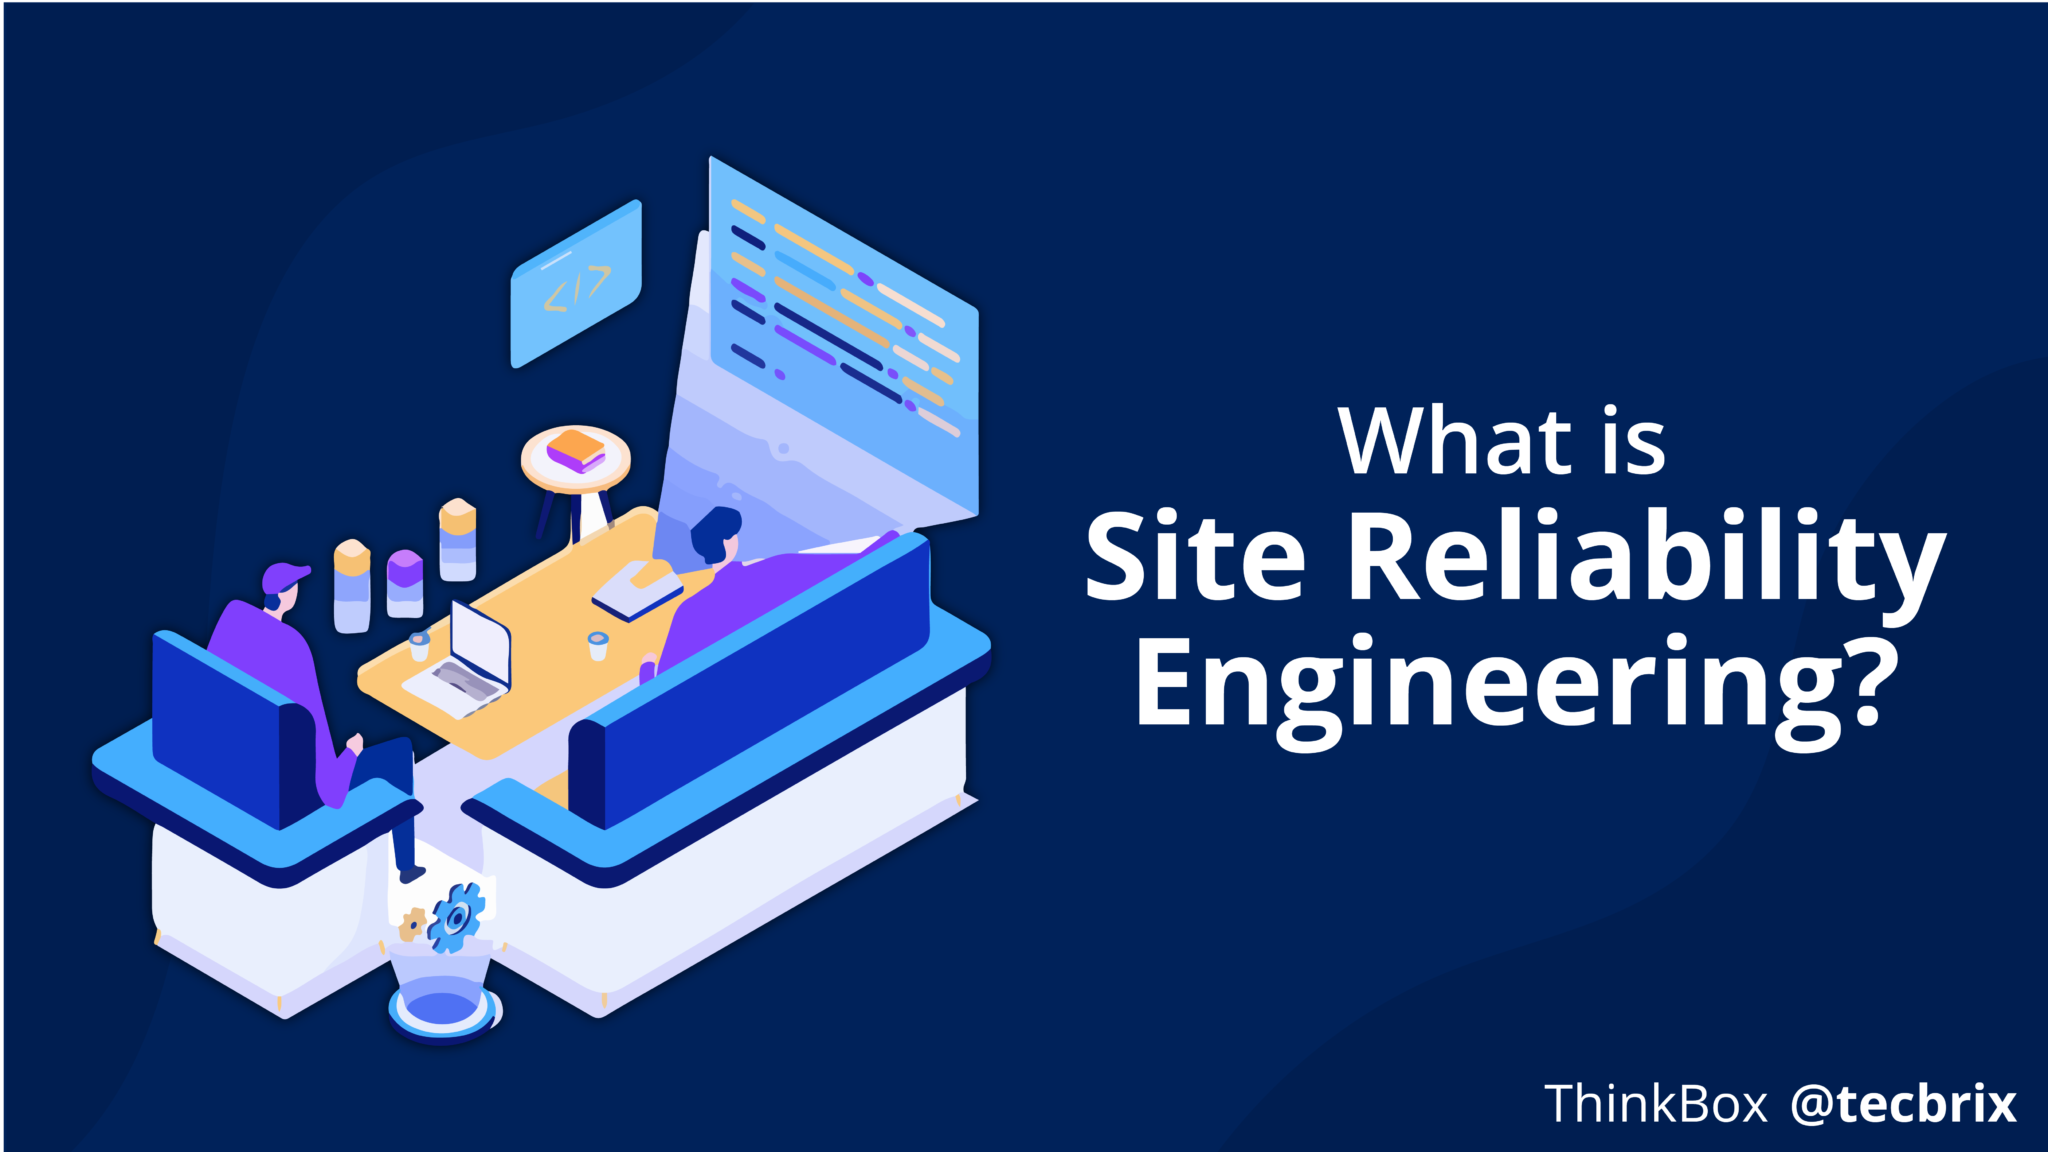 What is Site Reliability Engineering?